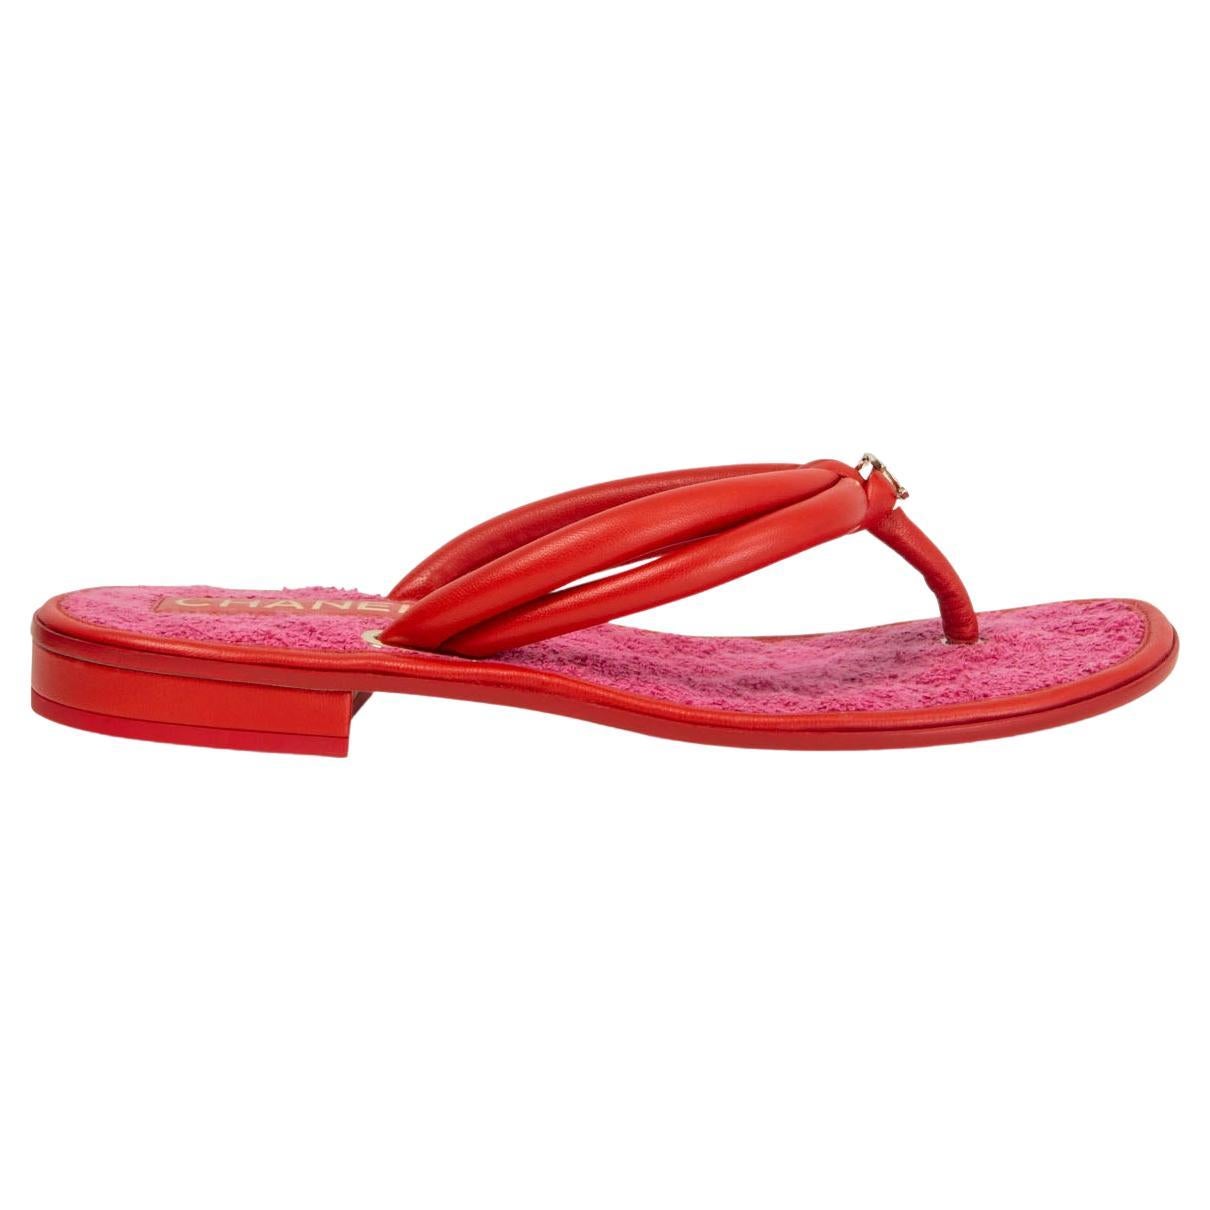 CHANEL red leather & pink terry cloth FLAT THONG Sandals Shoes 38.5 For Sale